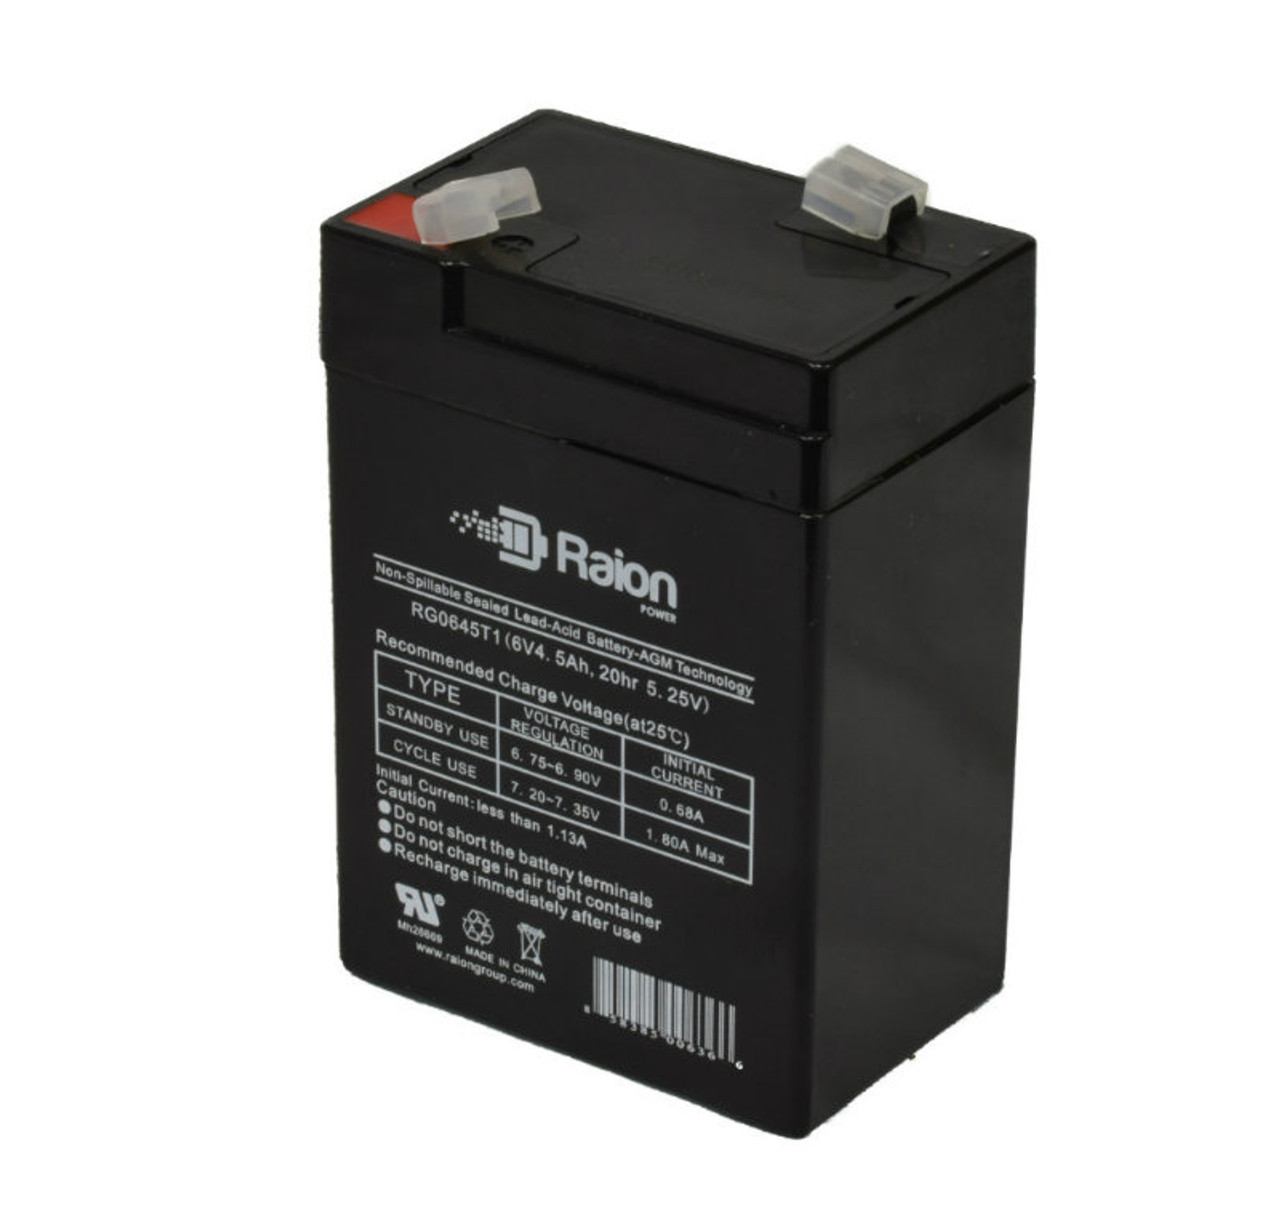 Raion Power RG0645T1 6V 4.5Ah Replacement Battery Cartridge for Peg Perego IGED0920 6V Scrambler Ducati